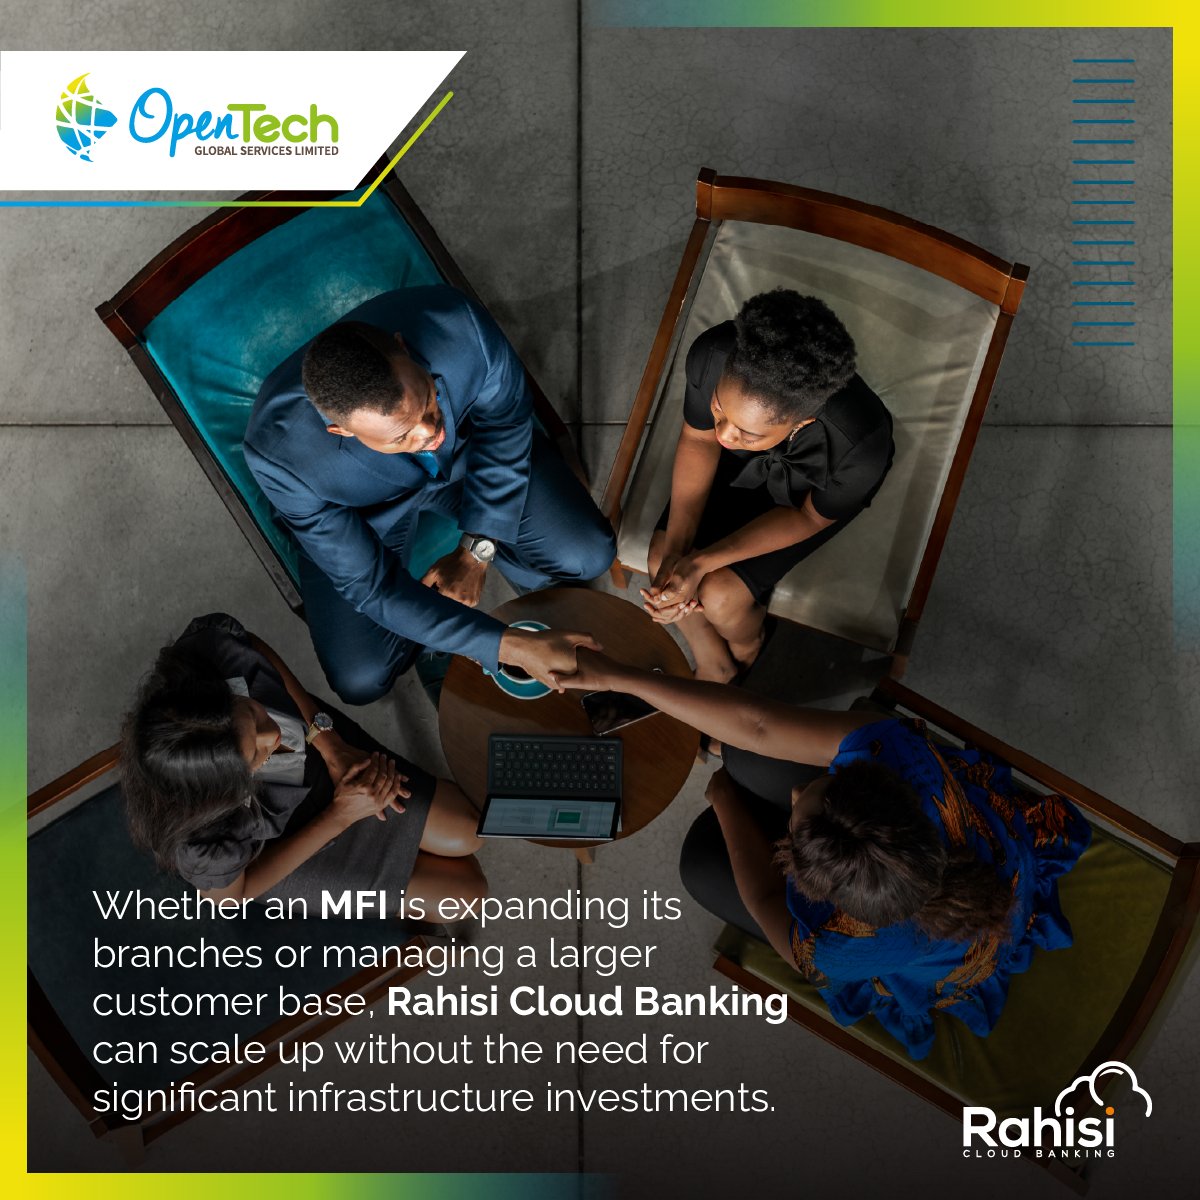 Rahisi Cloud Banking provides organizations with a solution to manage their customer base and branches more effectively.
#Microfinance #Fintech #MobileMoney #Banking #Accounting #CloudSolution #Mpesa #Efficiency #Innovation #BusinessGrowth #LoanManagement #CloudLoans #Scalability